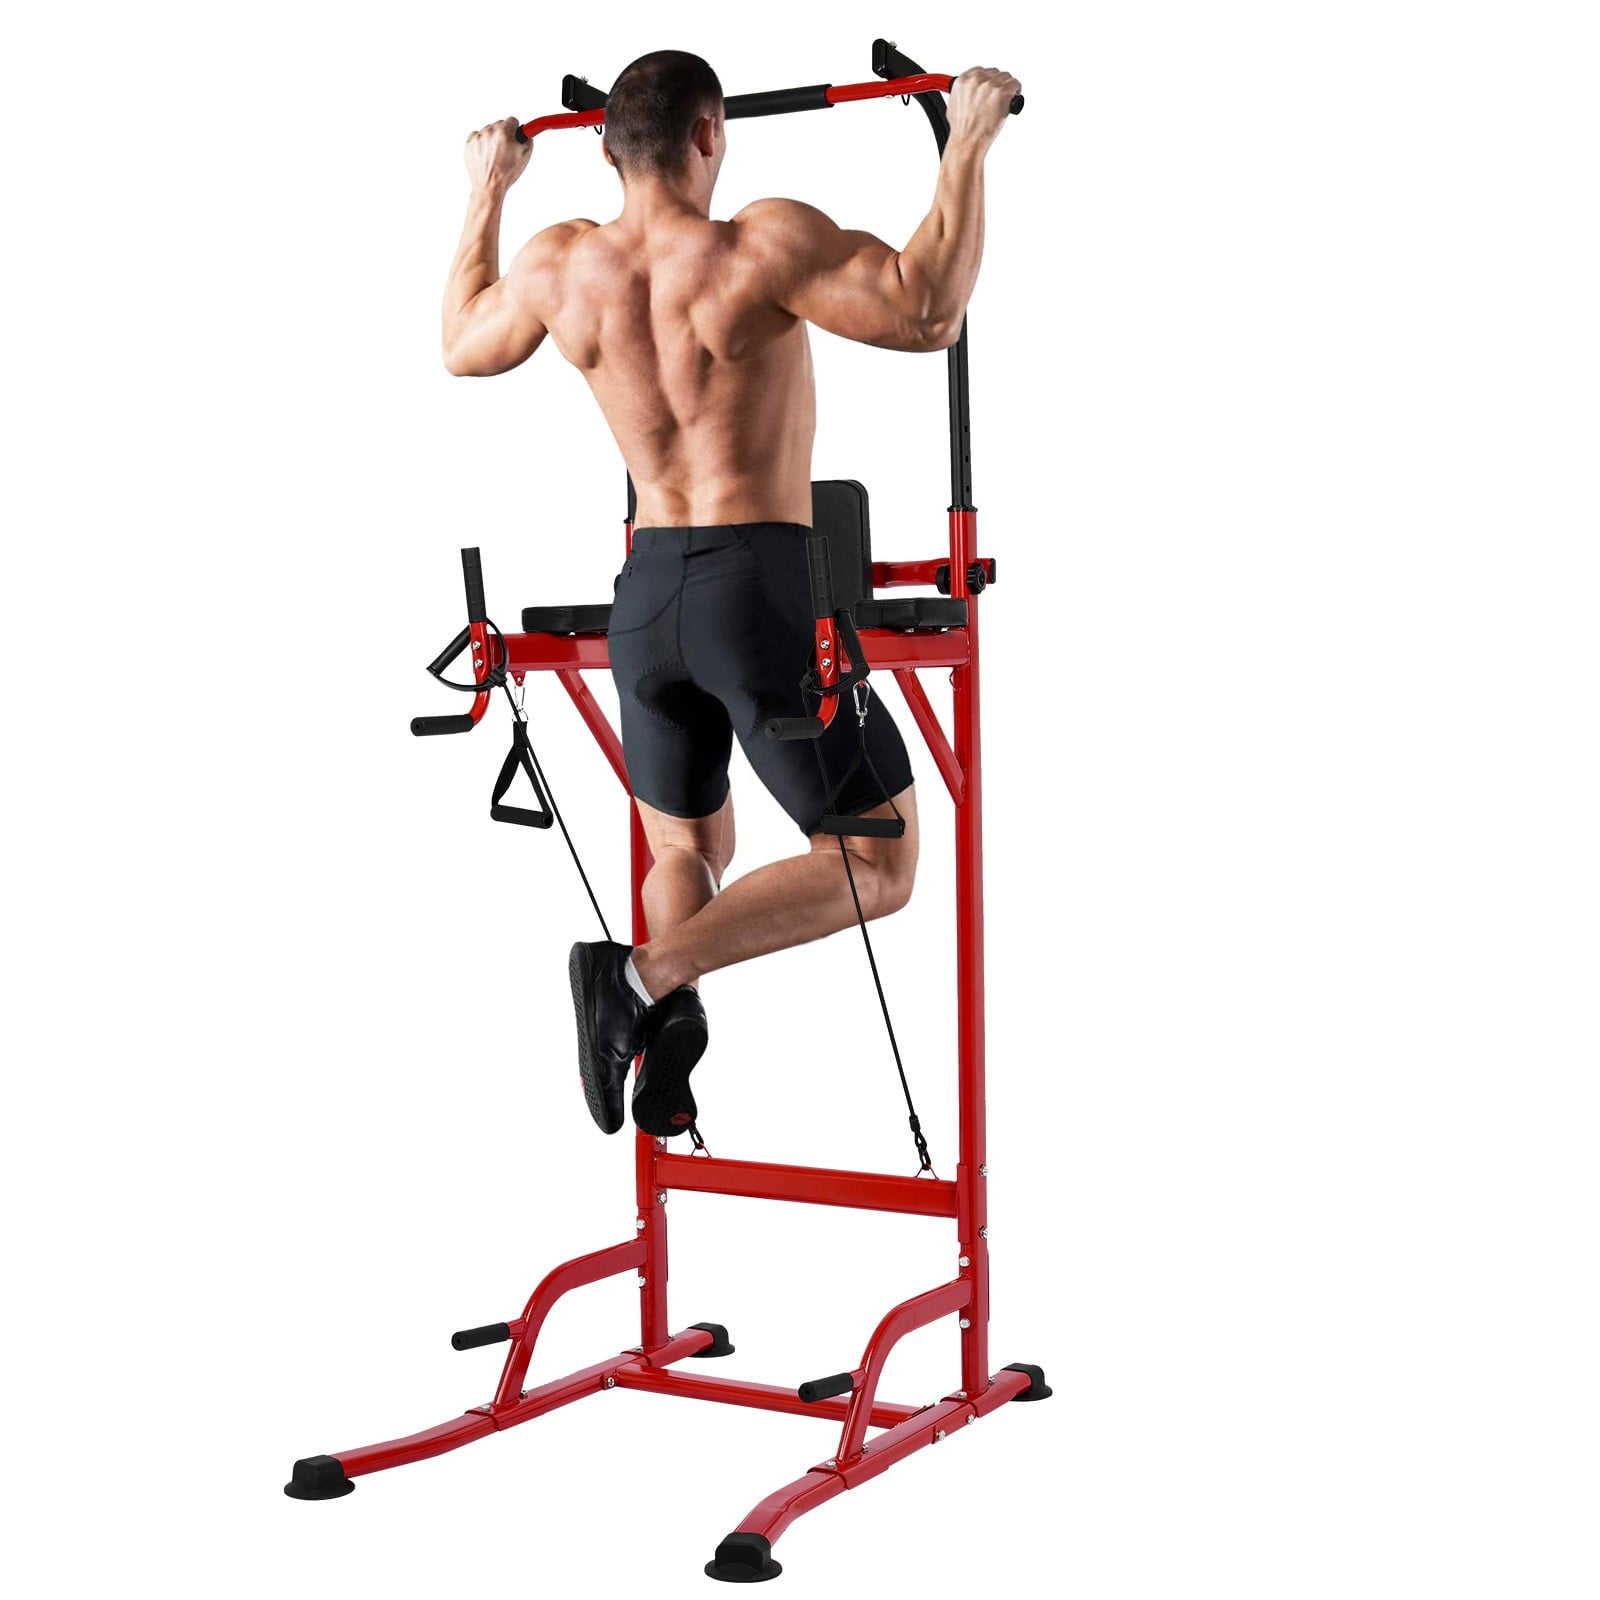 SPART Power Tower Pull Up Bar Adjustable Height Dip Stands Station 440LBS Adjustable Foldable Workout Bench Combo for Home Gym Strength Training Fitness Multi-Function Workout Equipment 